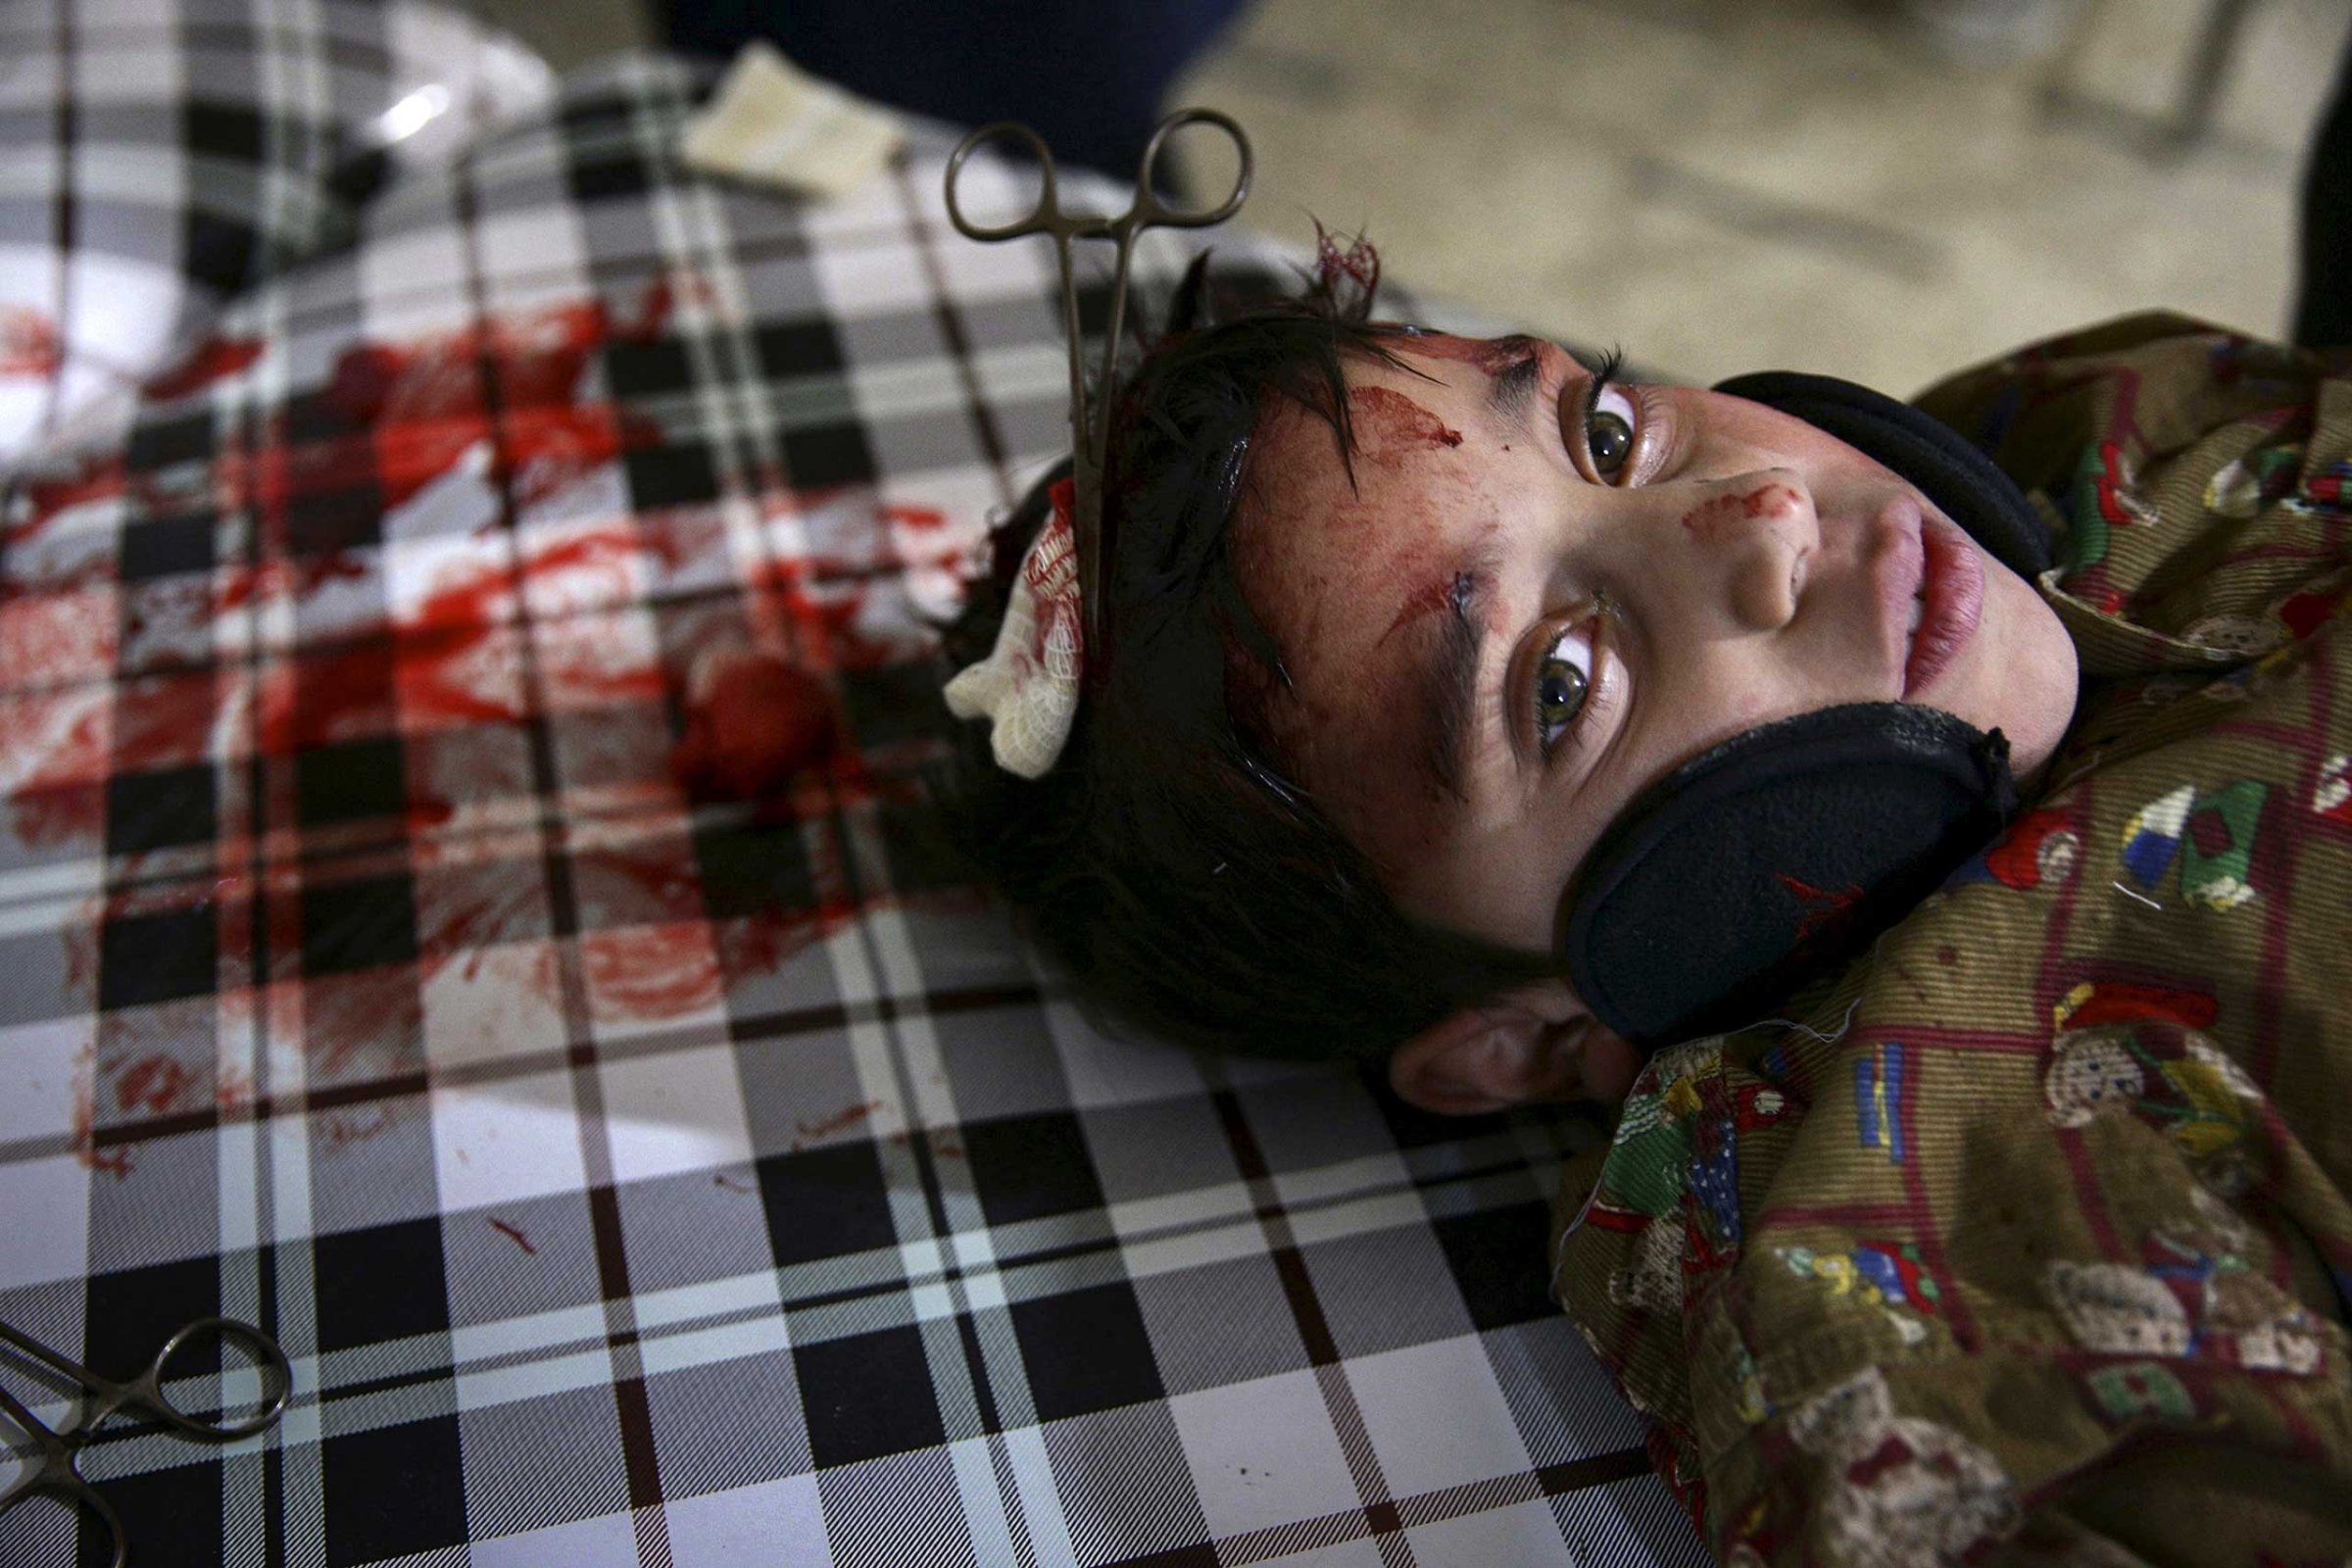 An injured boy undergoing surgery, after he was injured in what activists said was an airstrike by forces loyal to Syria's president Bashar al-Assad, rests inside a field hospital in the Douma neighborhood of Damascus, Syria December 5, 2015.